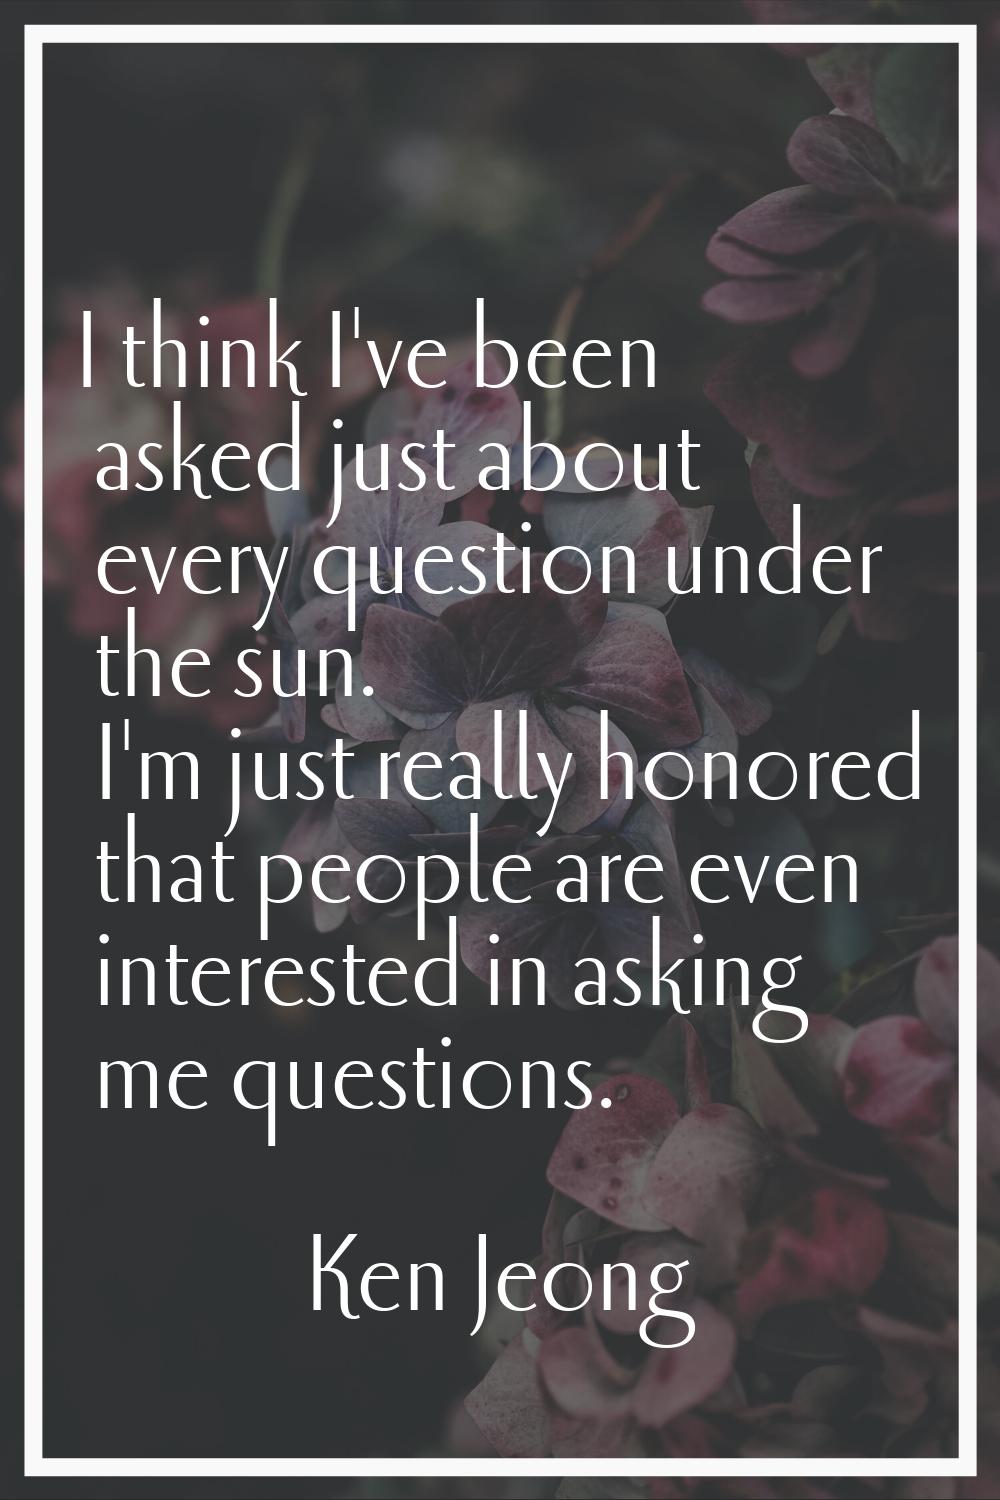 I think I've been asked just about every question under the sun. I'm just really honored that peopl